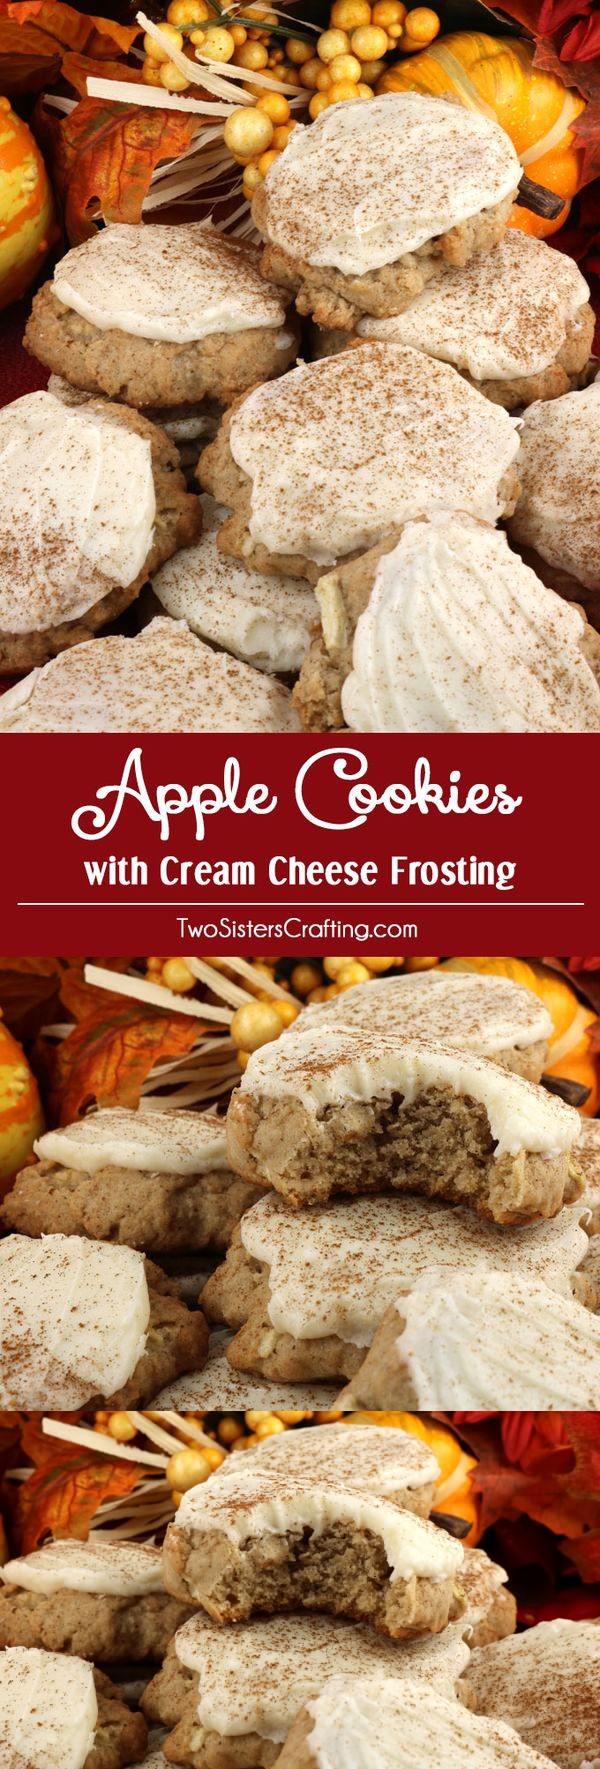 Apple Cookies and Cream Cheese Frosting